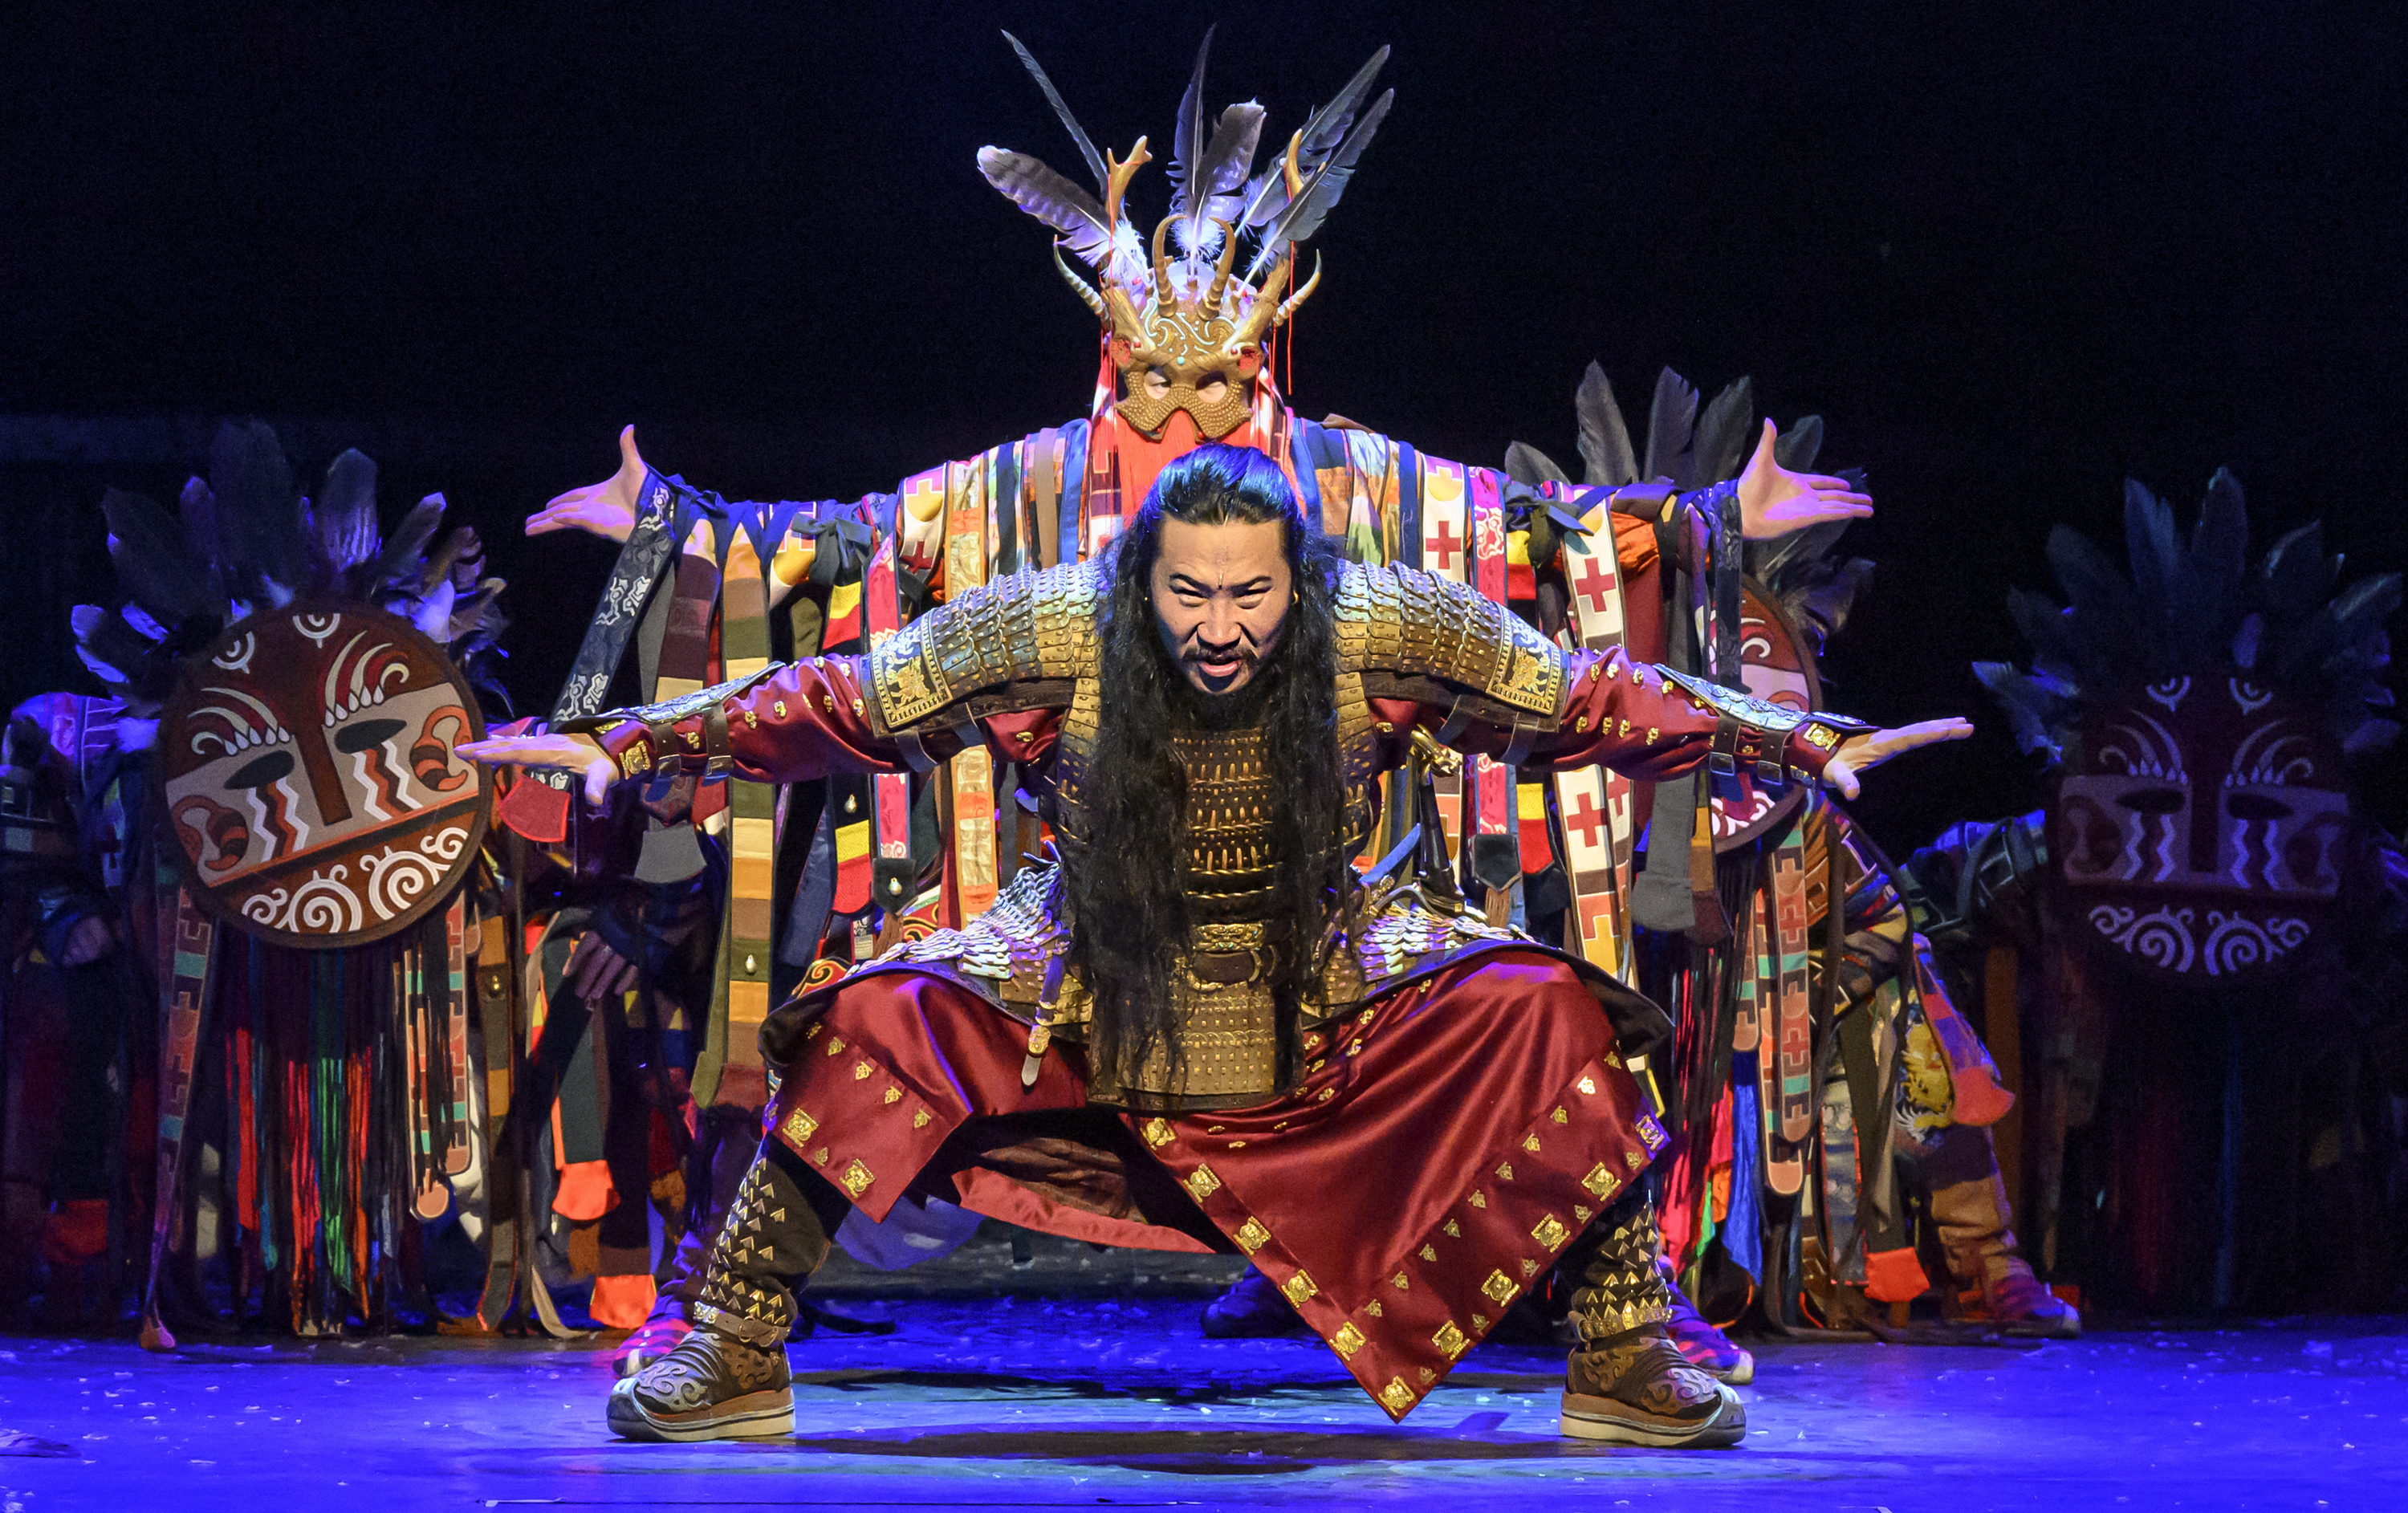 Large-scale theatre show ‘The Mongol Khan’ makes its Asia premiere in Singapore at Sands Theatre this October